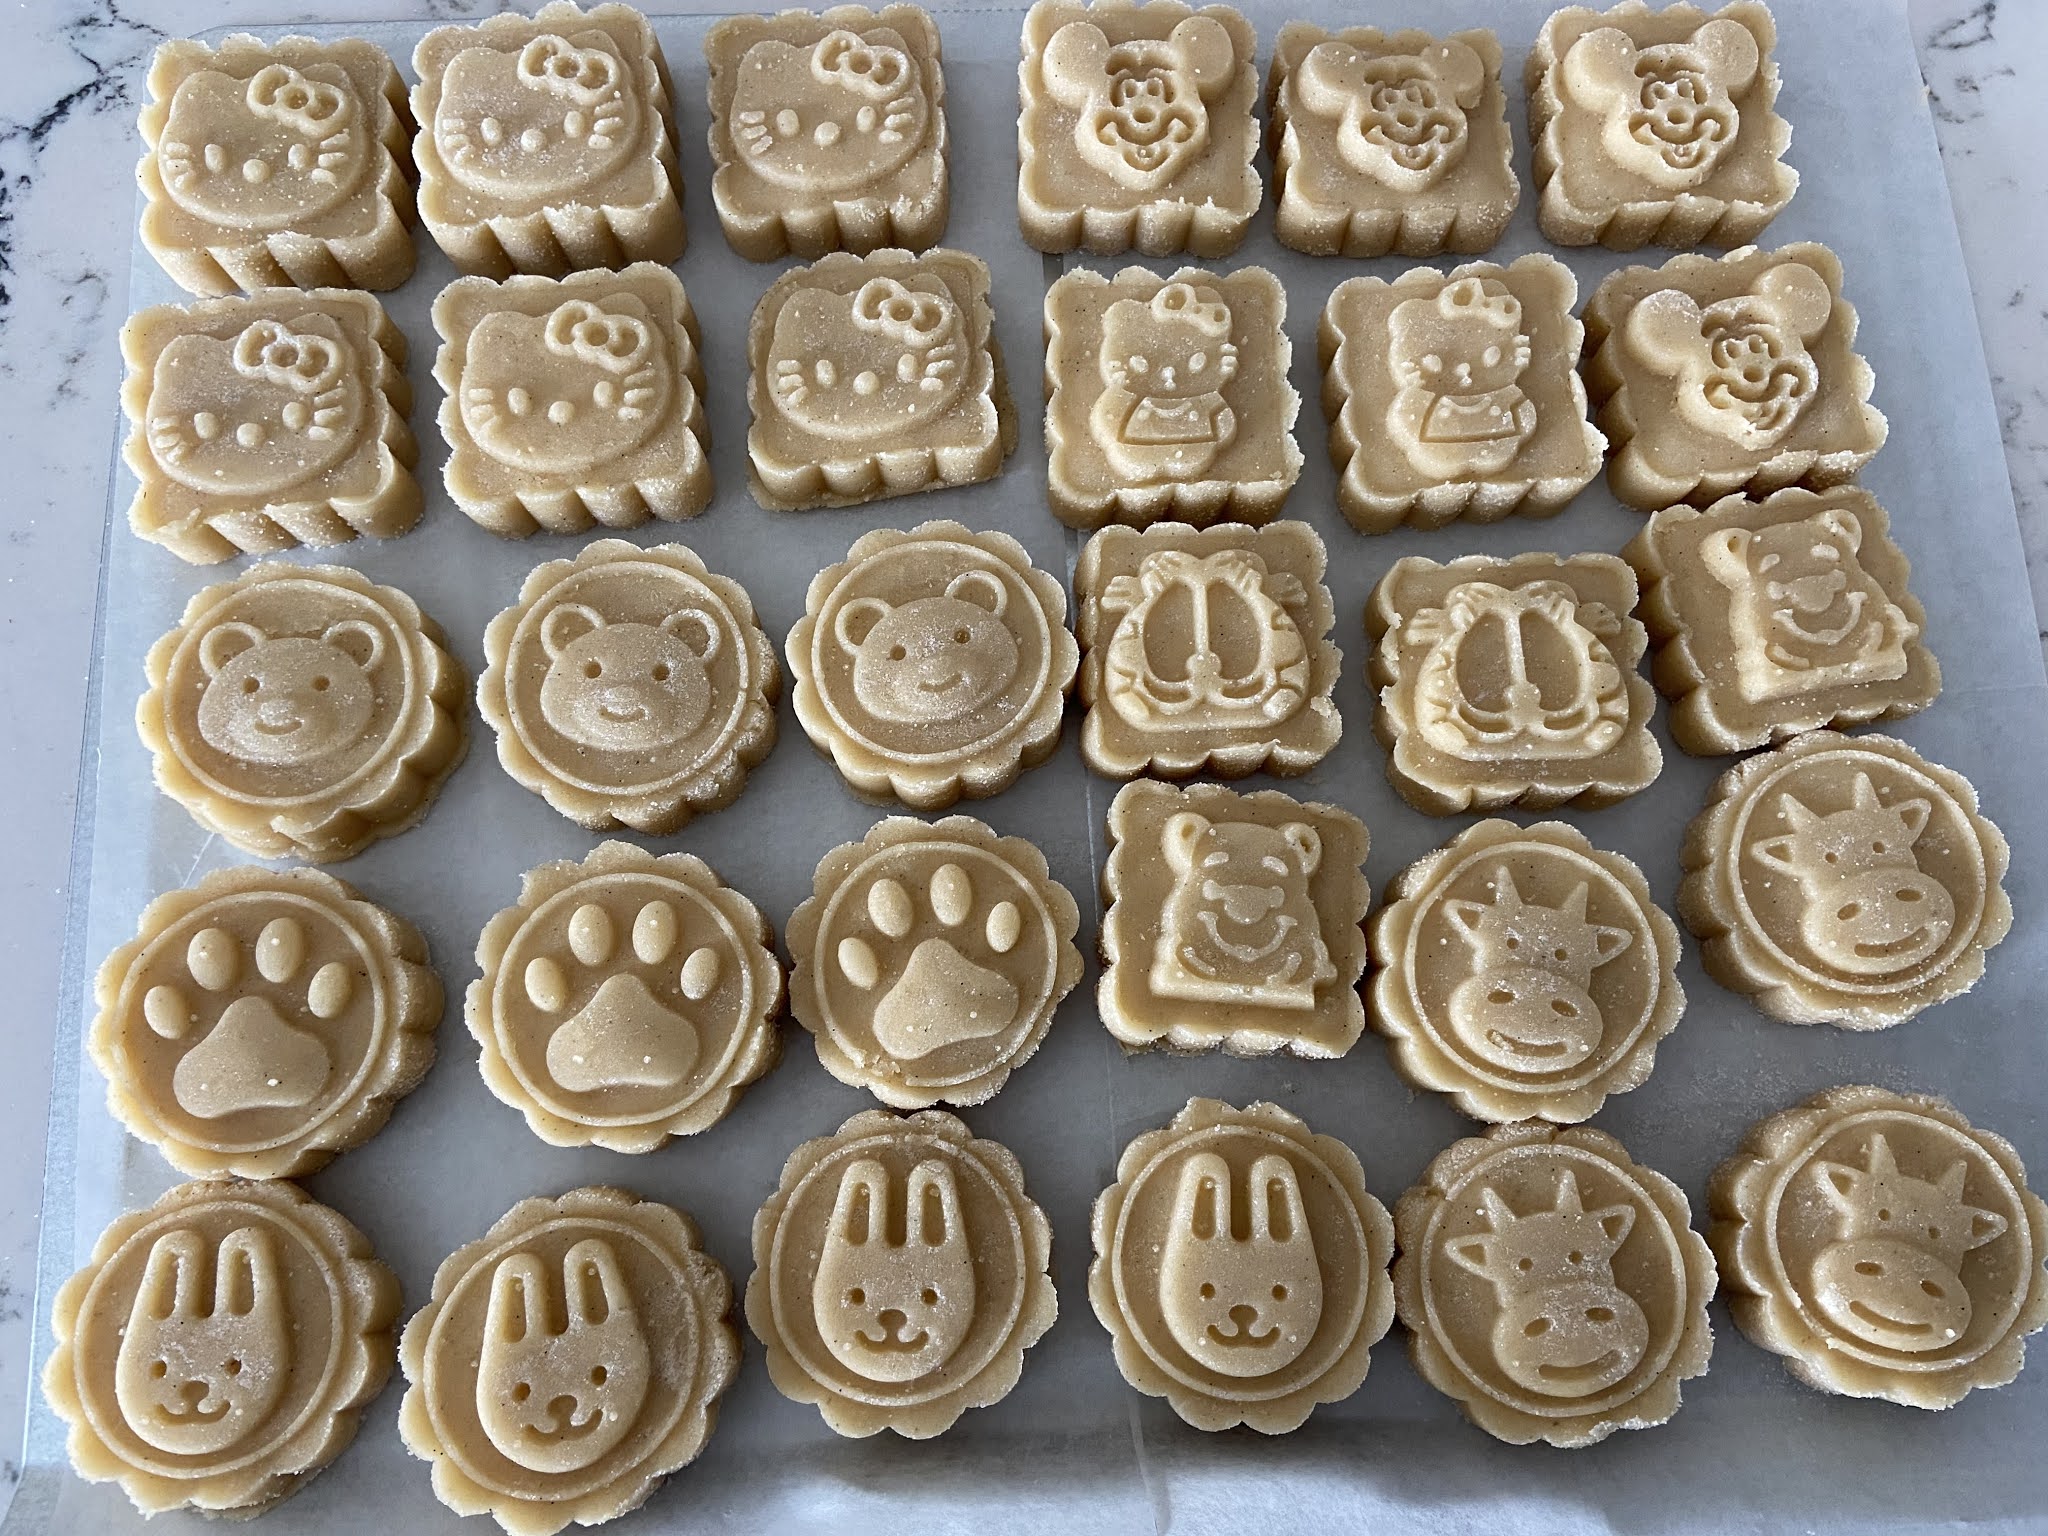 The Pastry Chef's Baking: Stamped Shortbread Cookies (recipe 4)